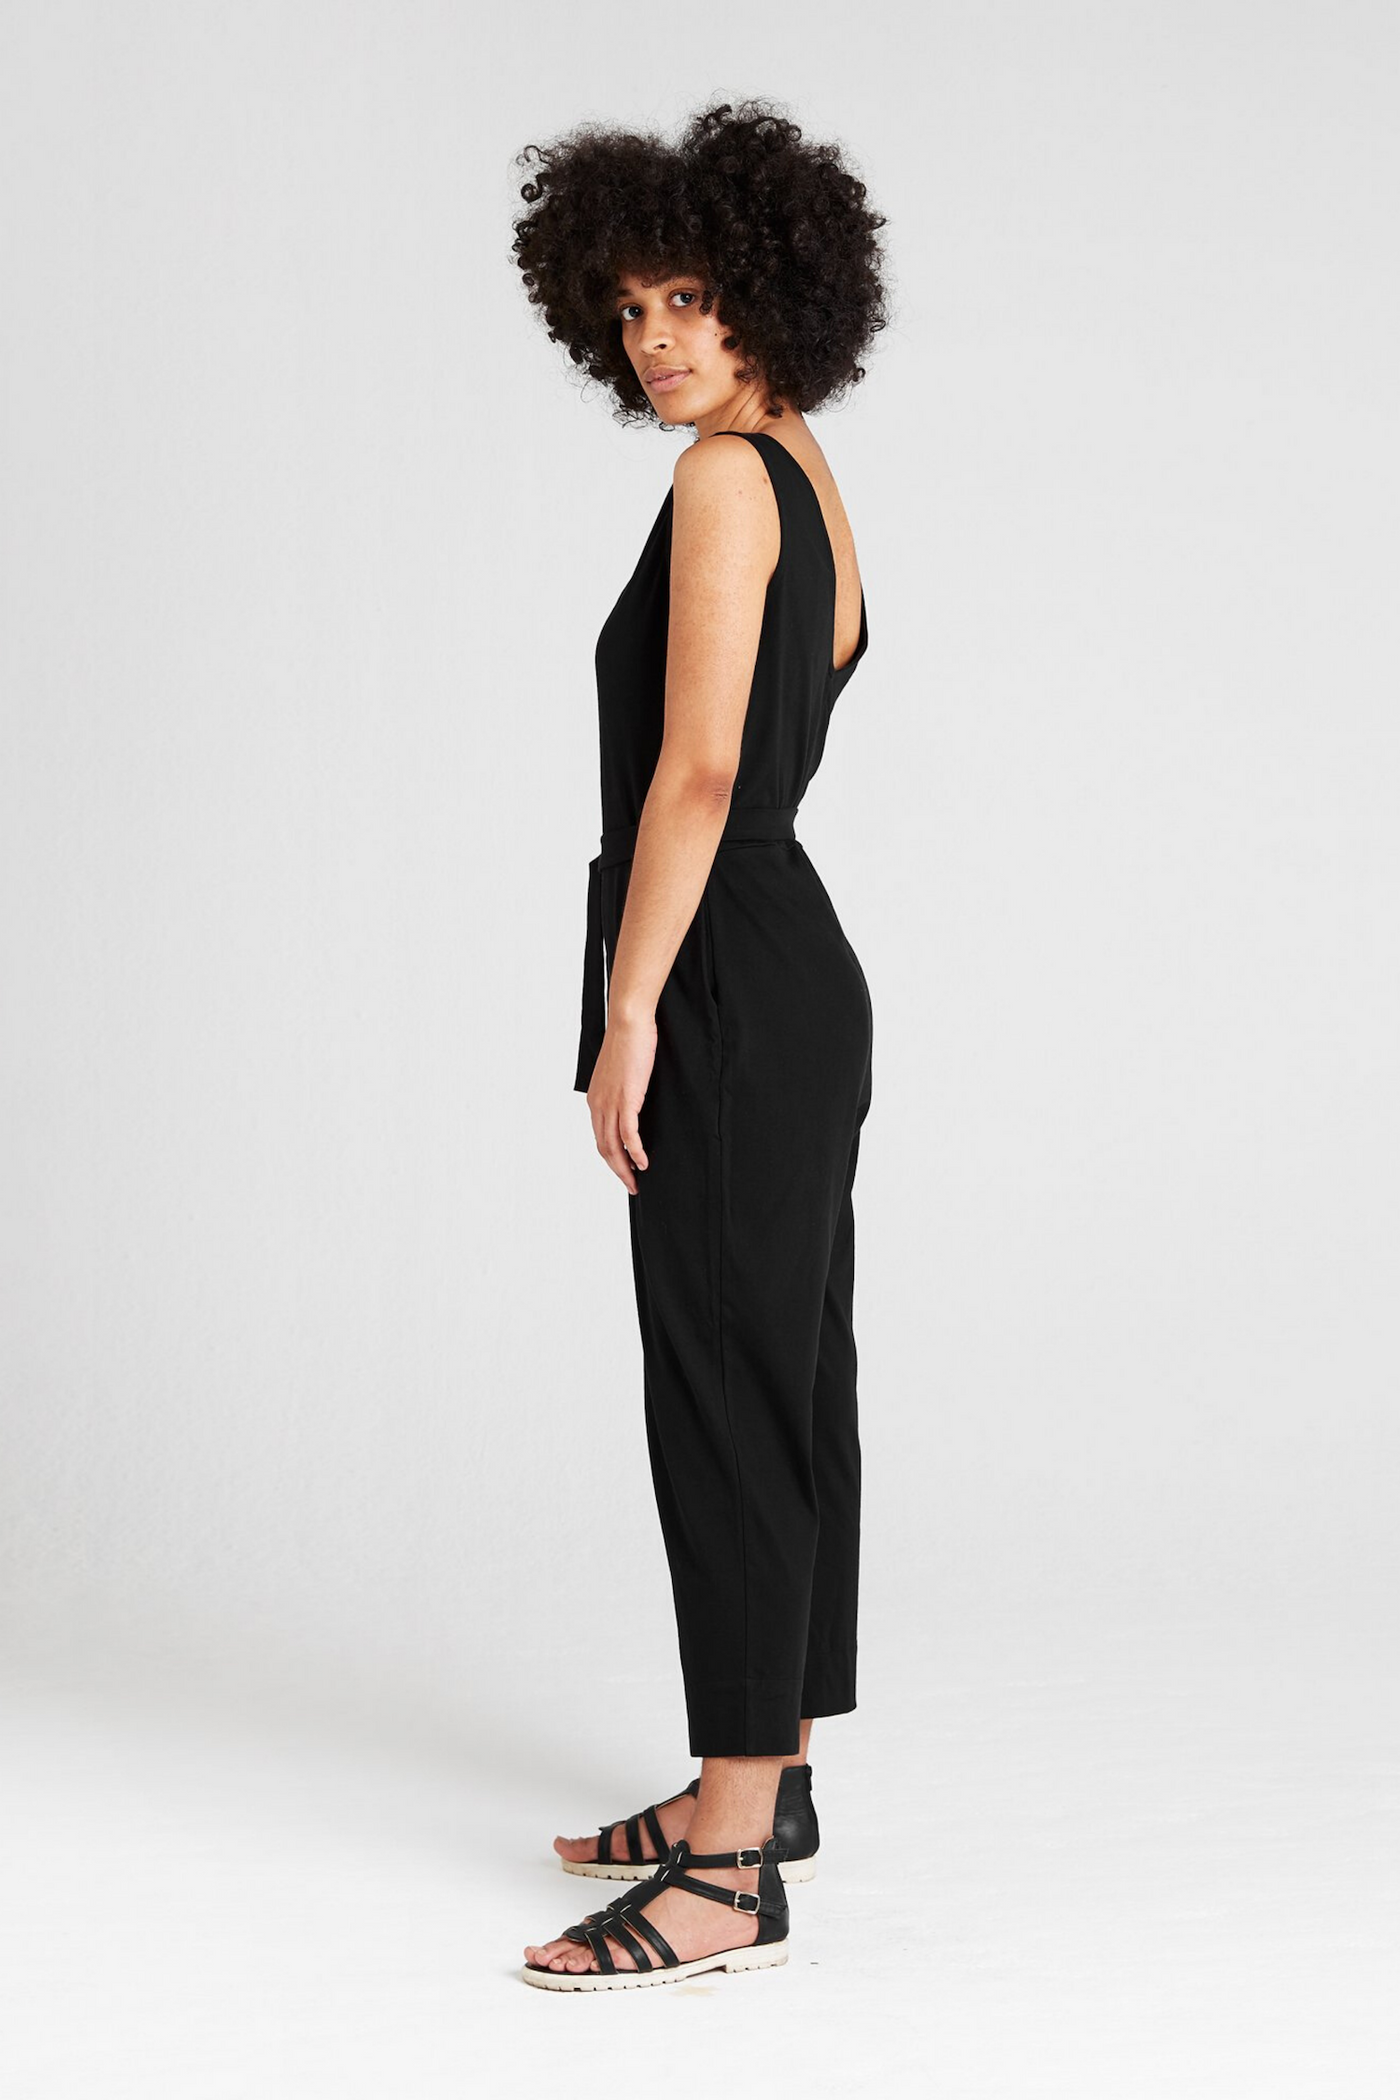 Dorsu Black Jumpsuit, available on ZERRIN with free Singapore shipping